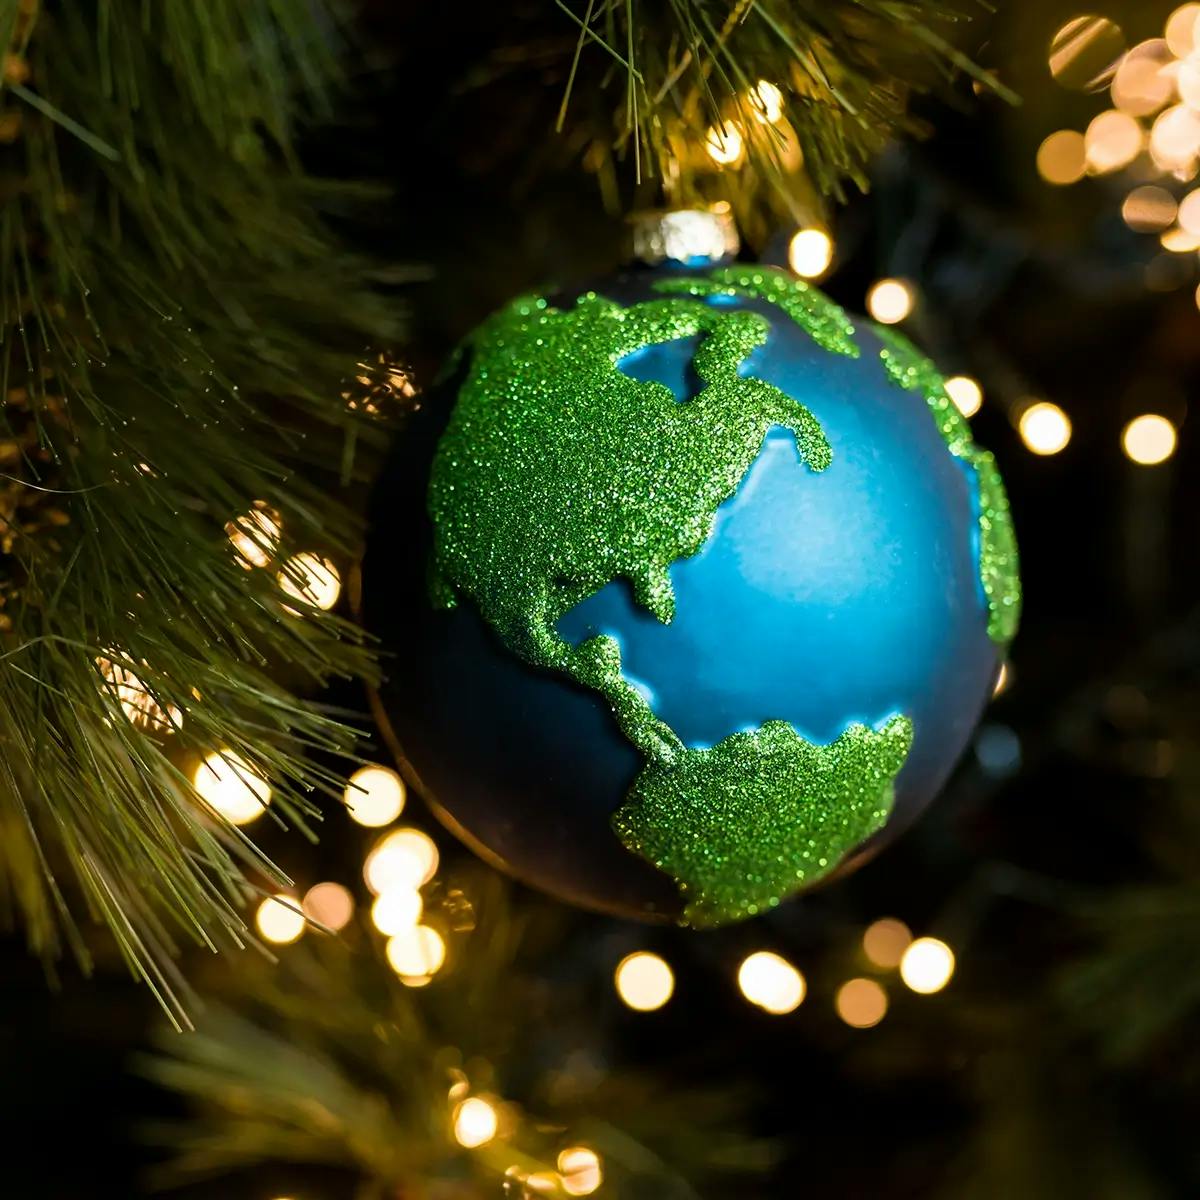 Close-up of Christmas ornament shaped like planet earth on the background of the Christmas tree.